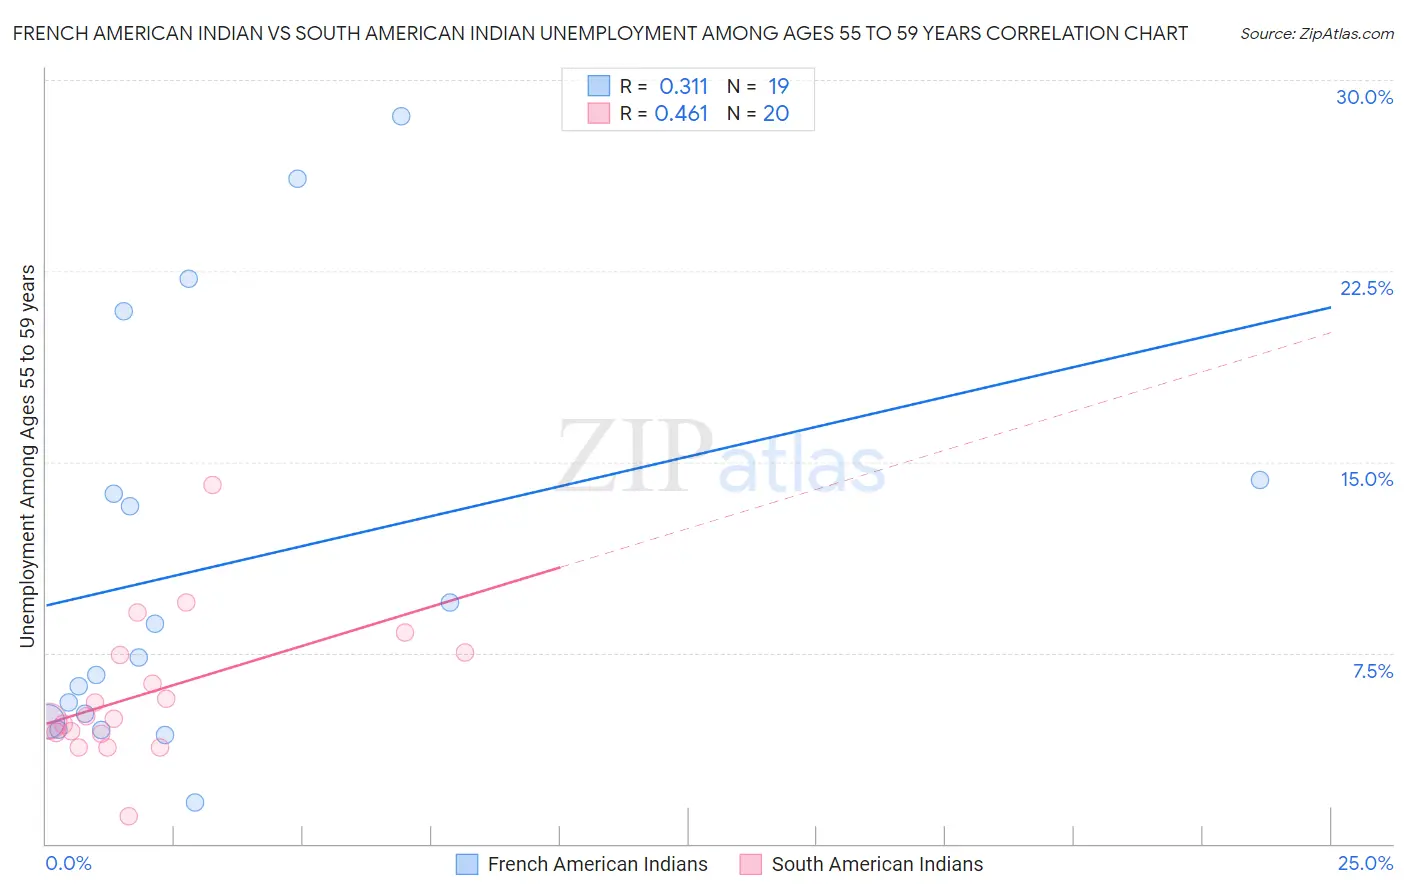 French American Indian vs South American Indian Unemployment Among Ages 55 to 59 years